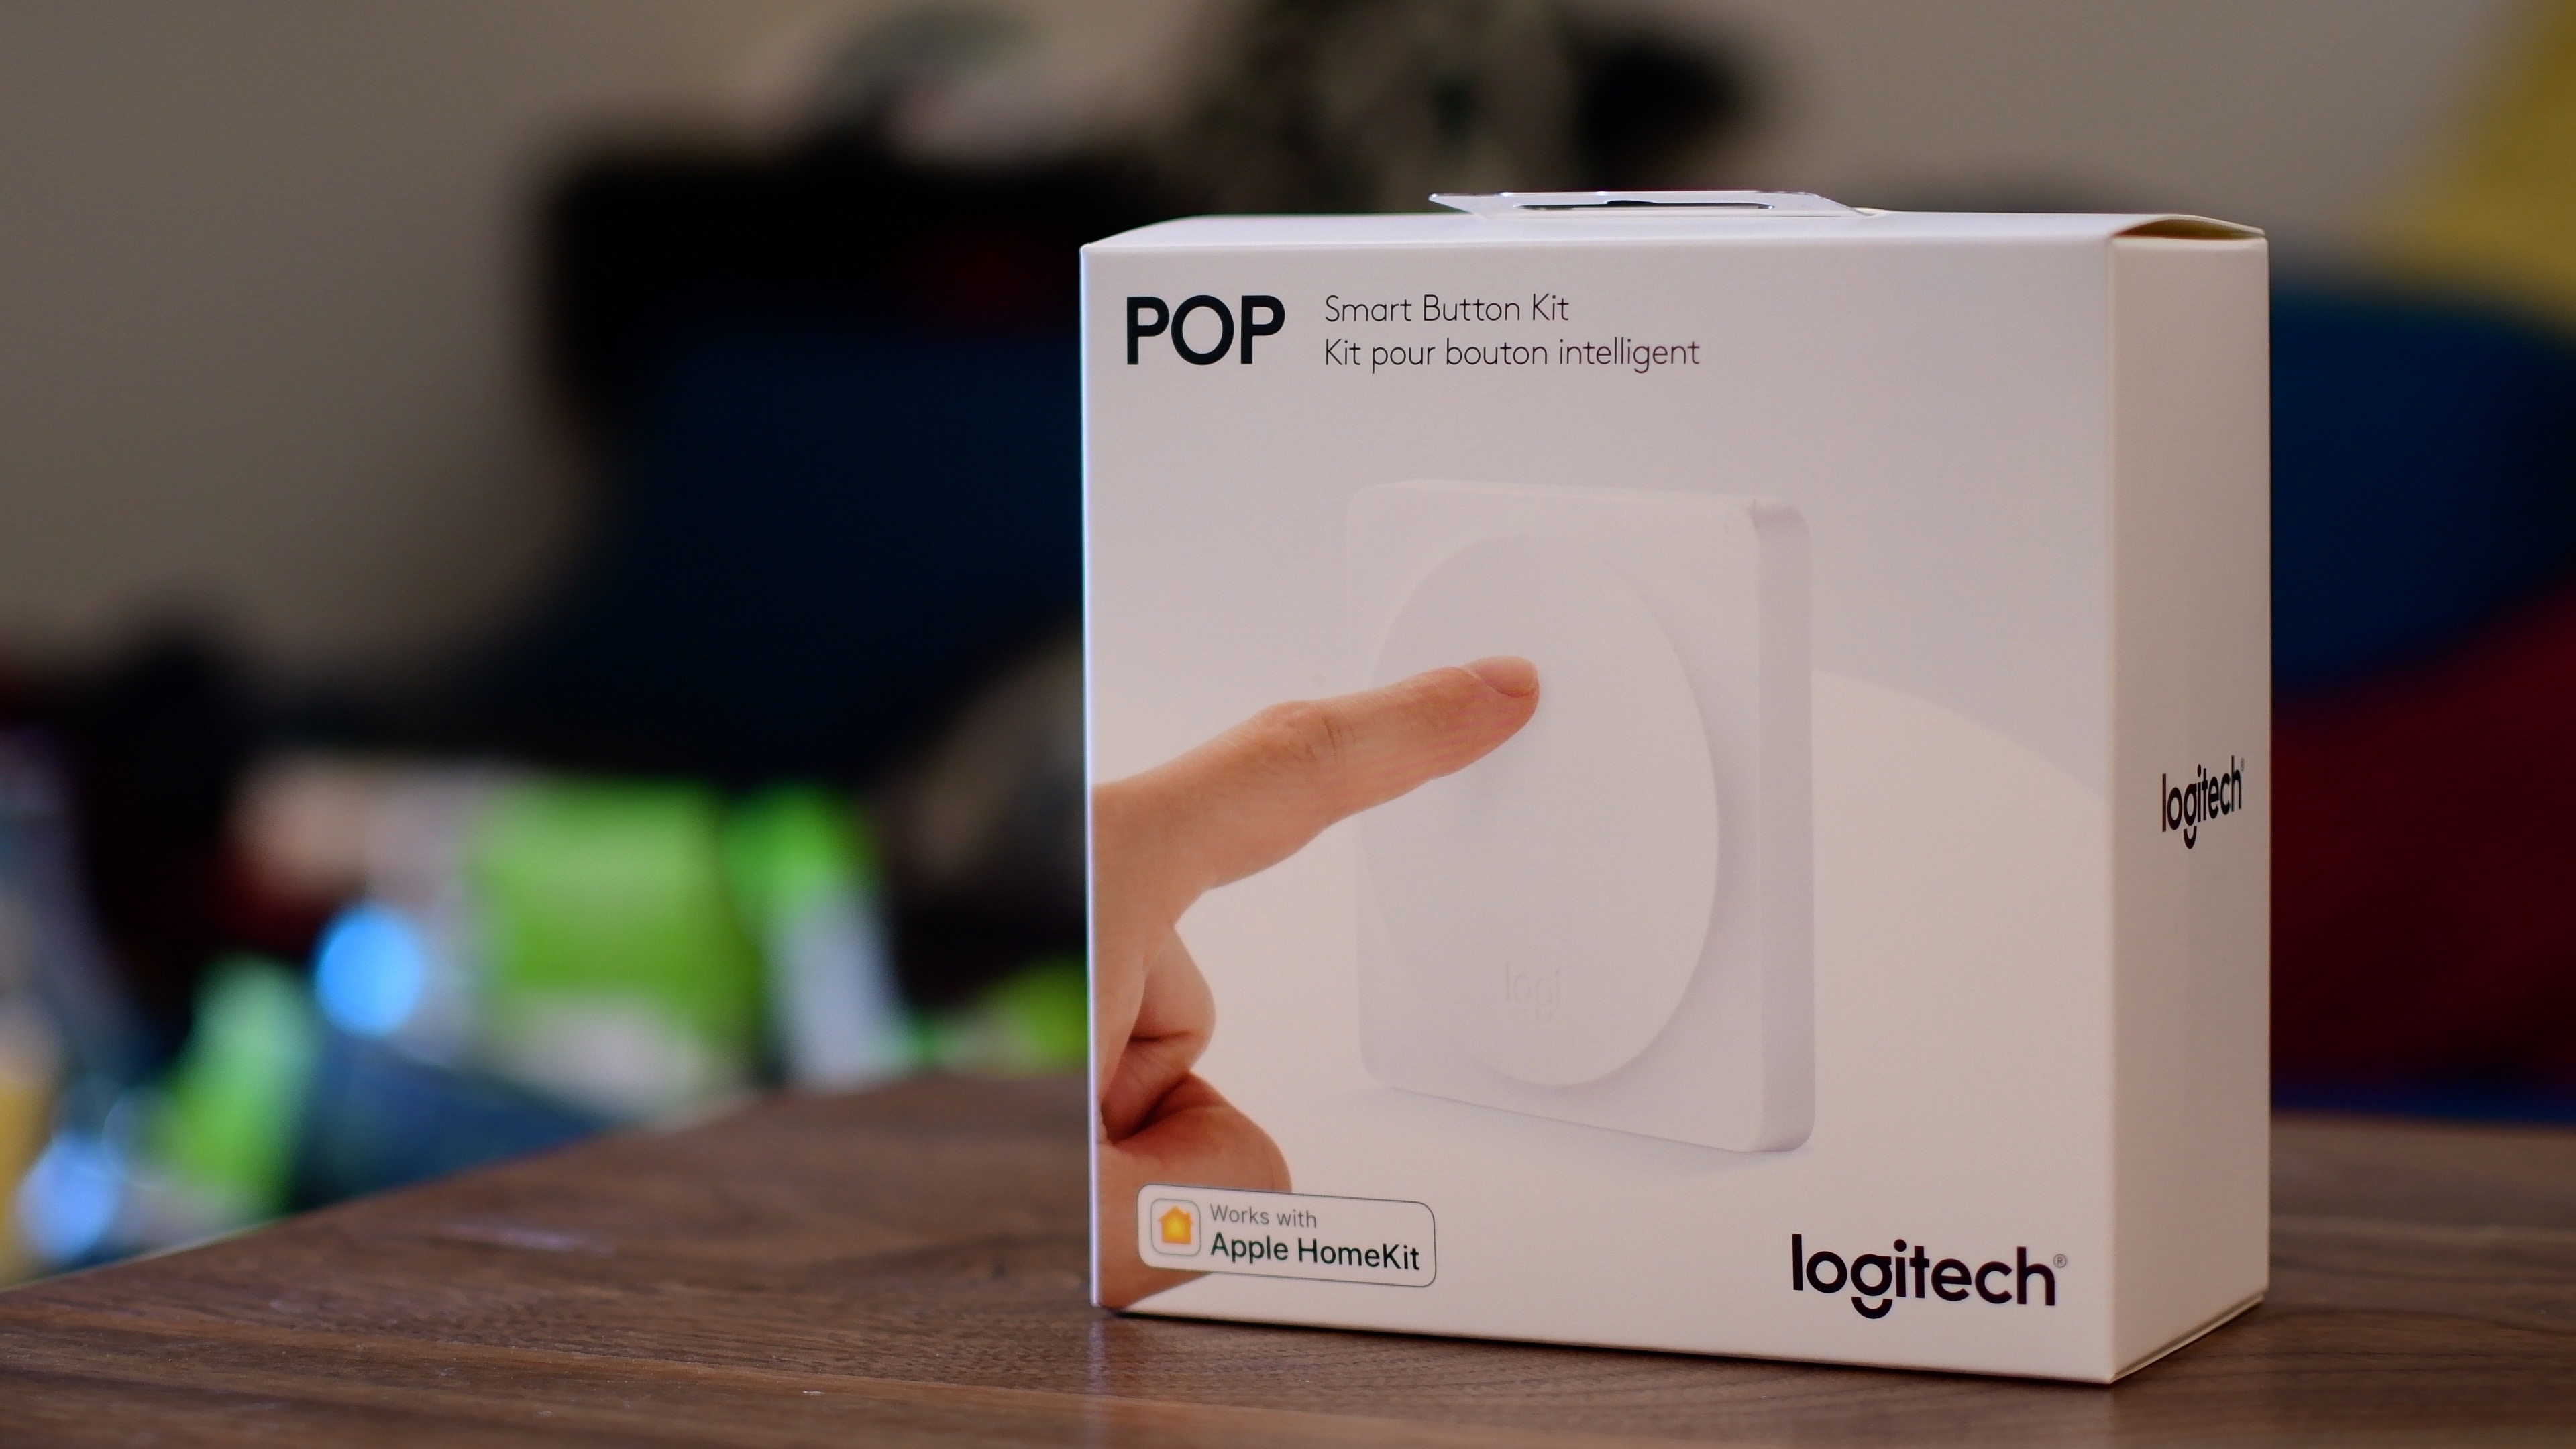 Tom Audreath porter forhøjet Review: Logitech HomeKit Pop button is affordable and essential